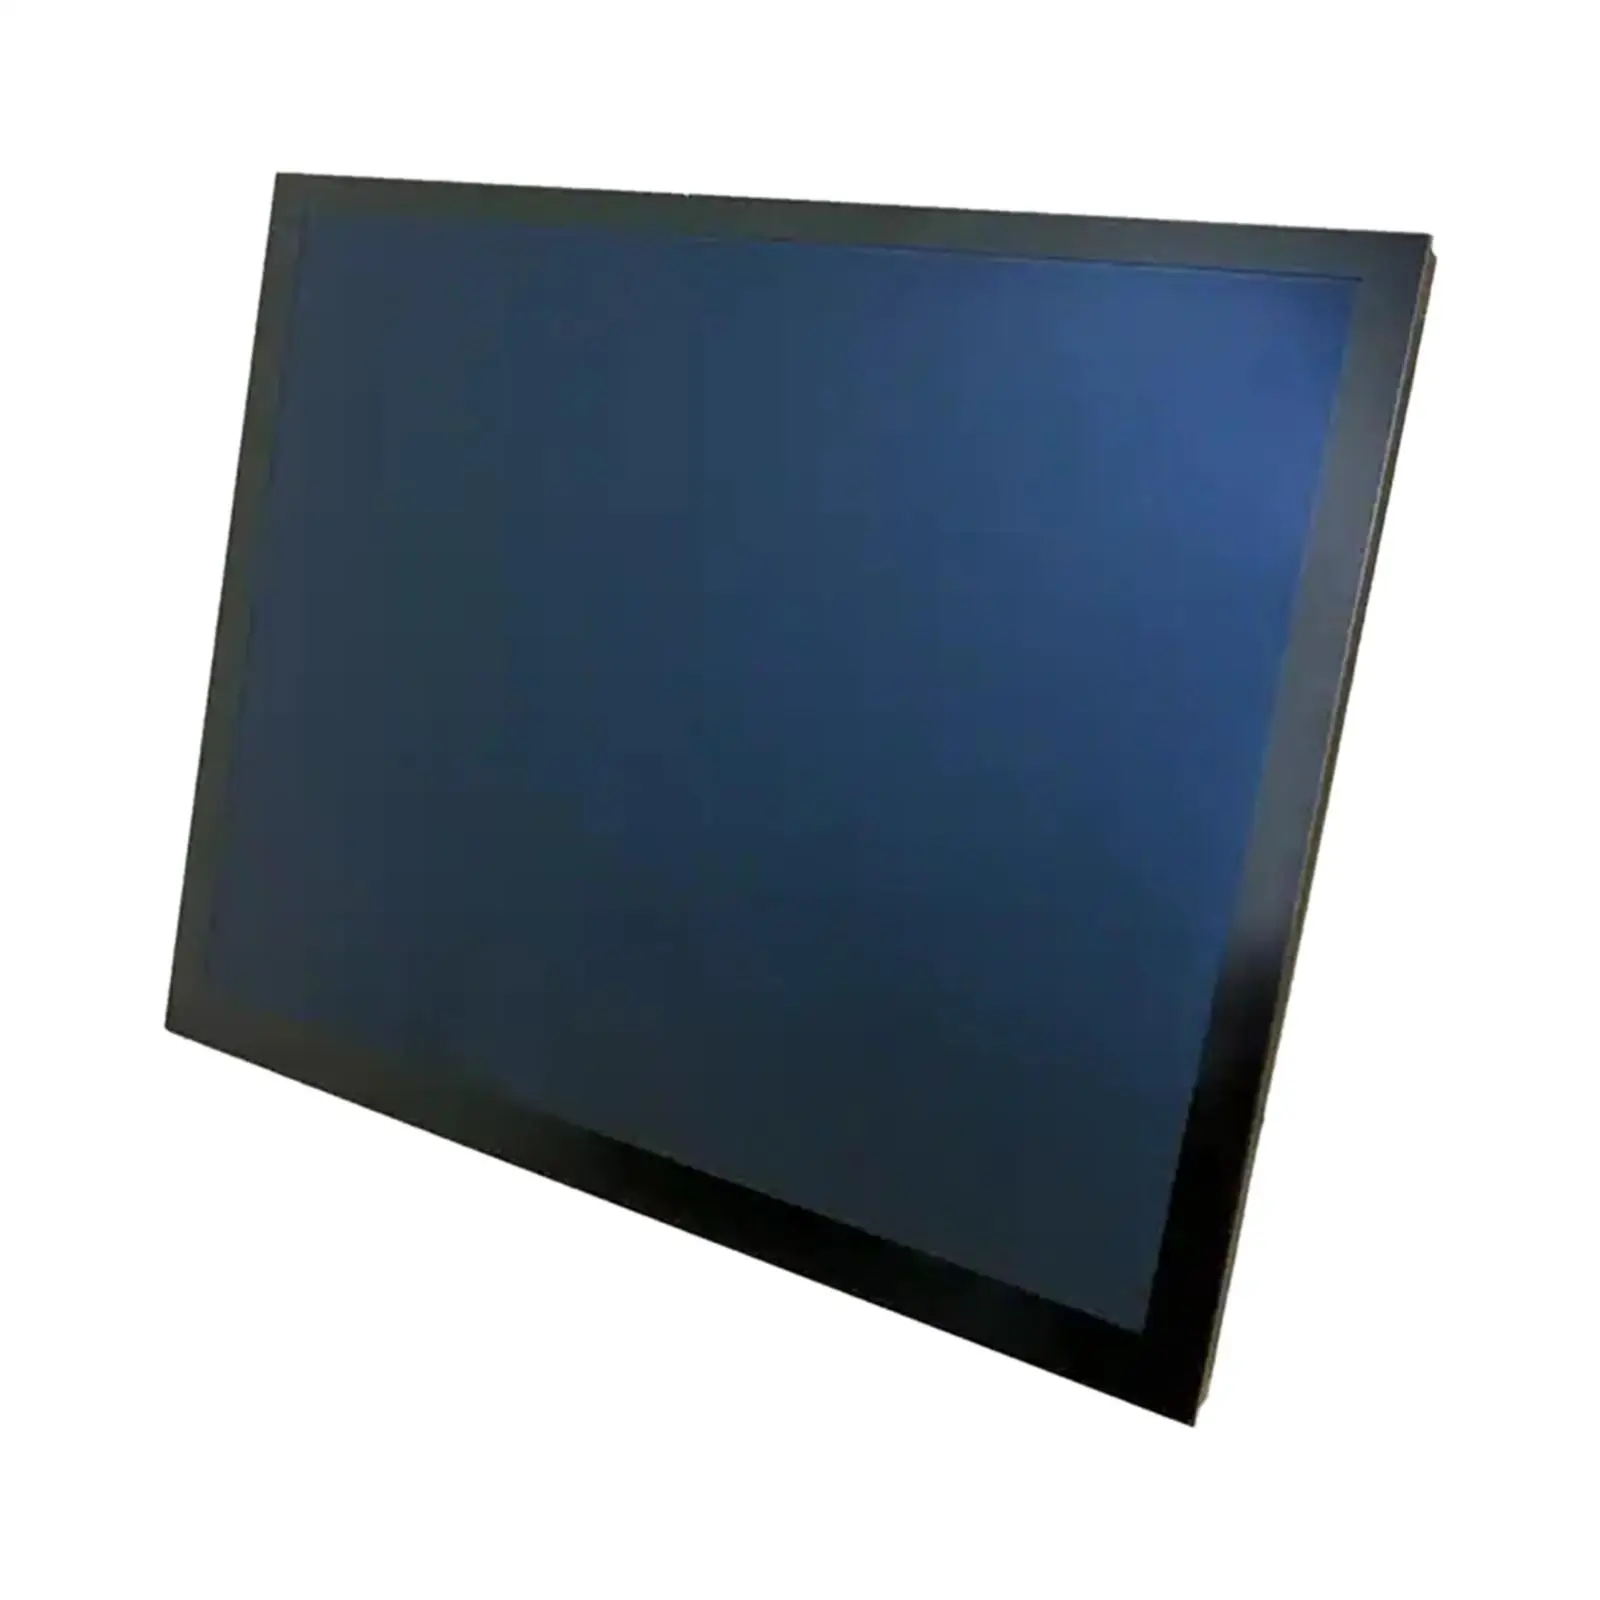 8.4 Inches Touch Screen LA084x01 Replace Parts Display Screen for Dodge